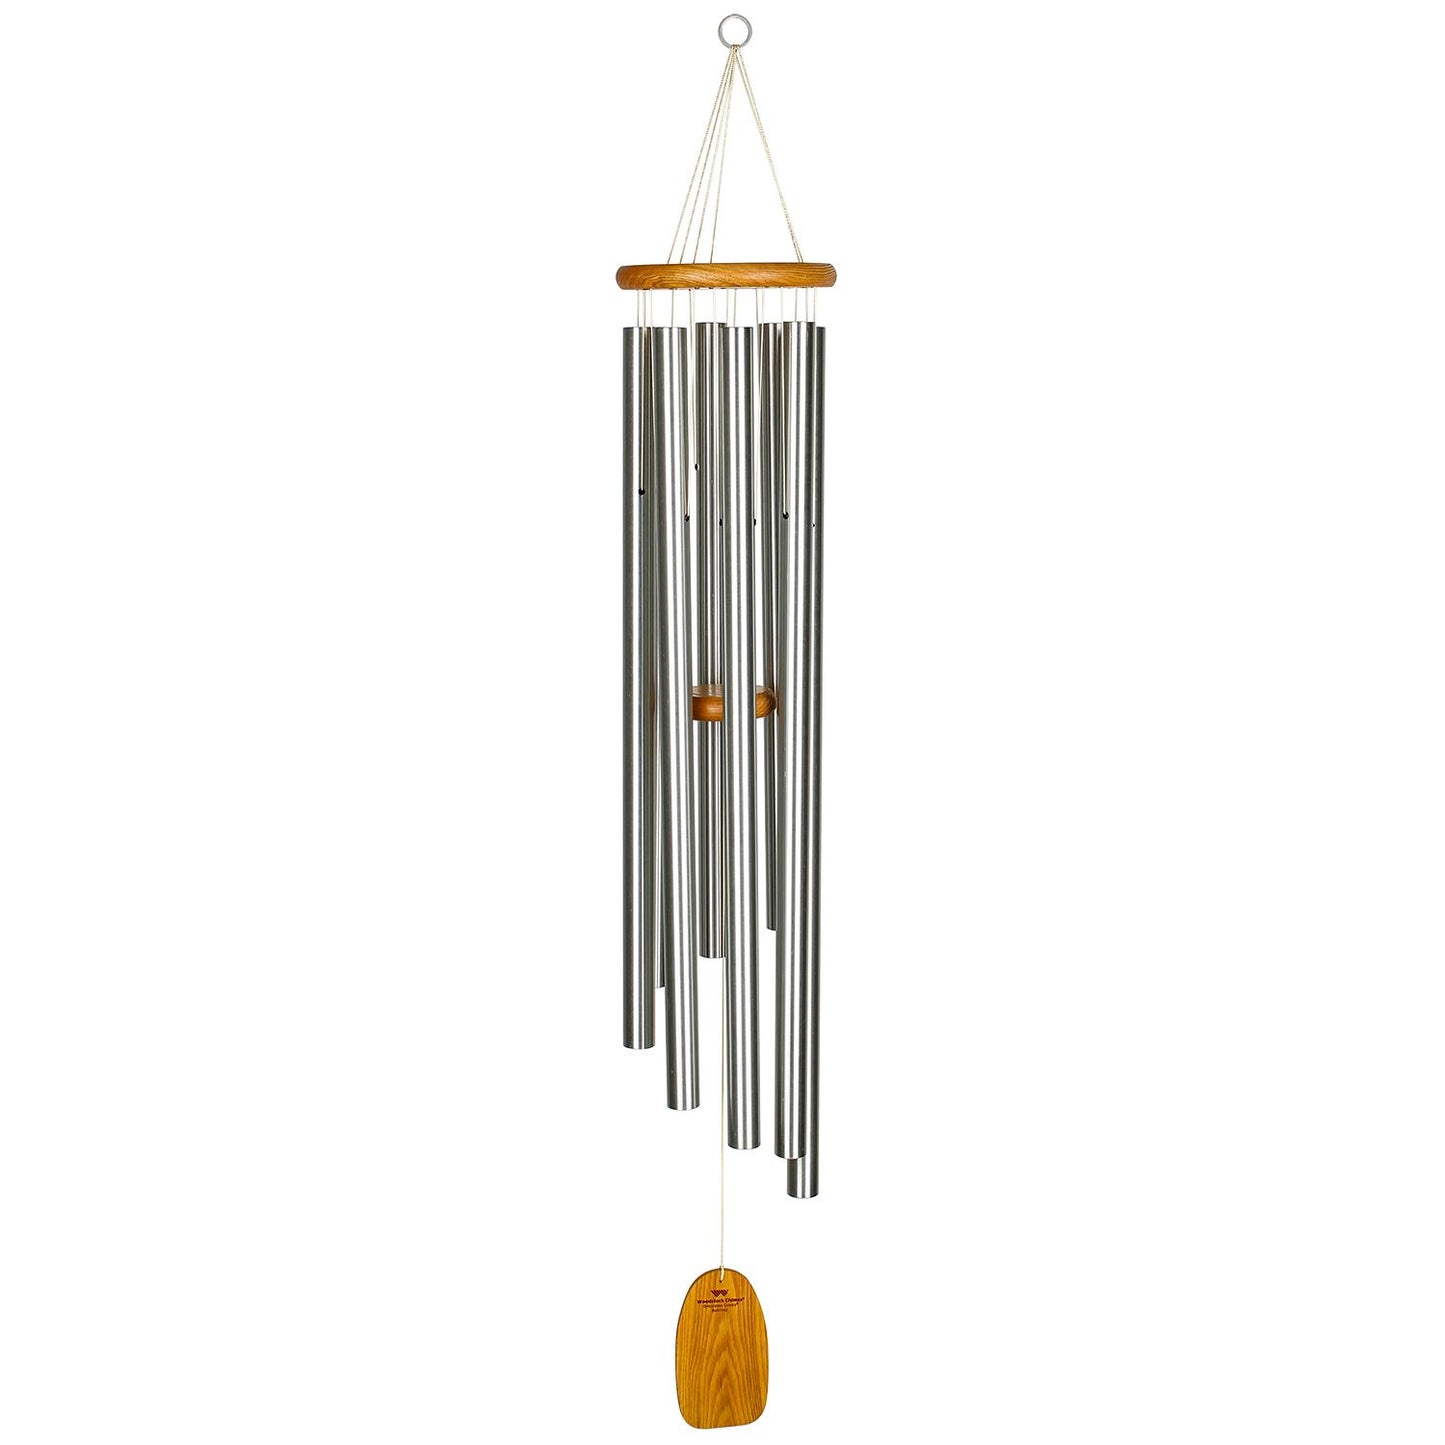 56" Gregorian Baritone Wind Chime by Woodstock | Outdoor Chimes | Yard Decor | Housewarming Gifts | Gifts for Mom | Gifts for Her